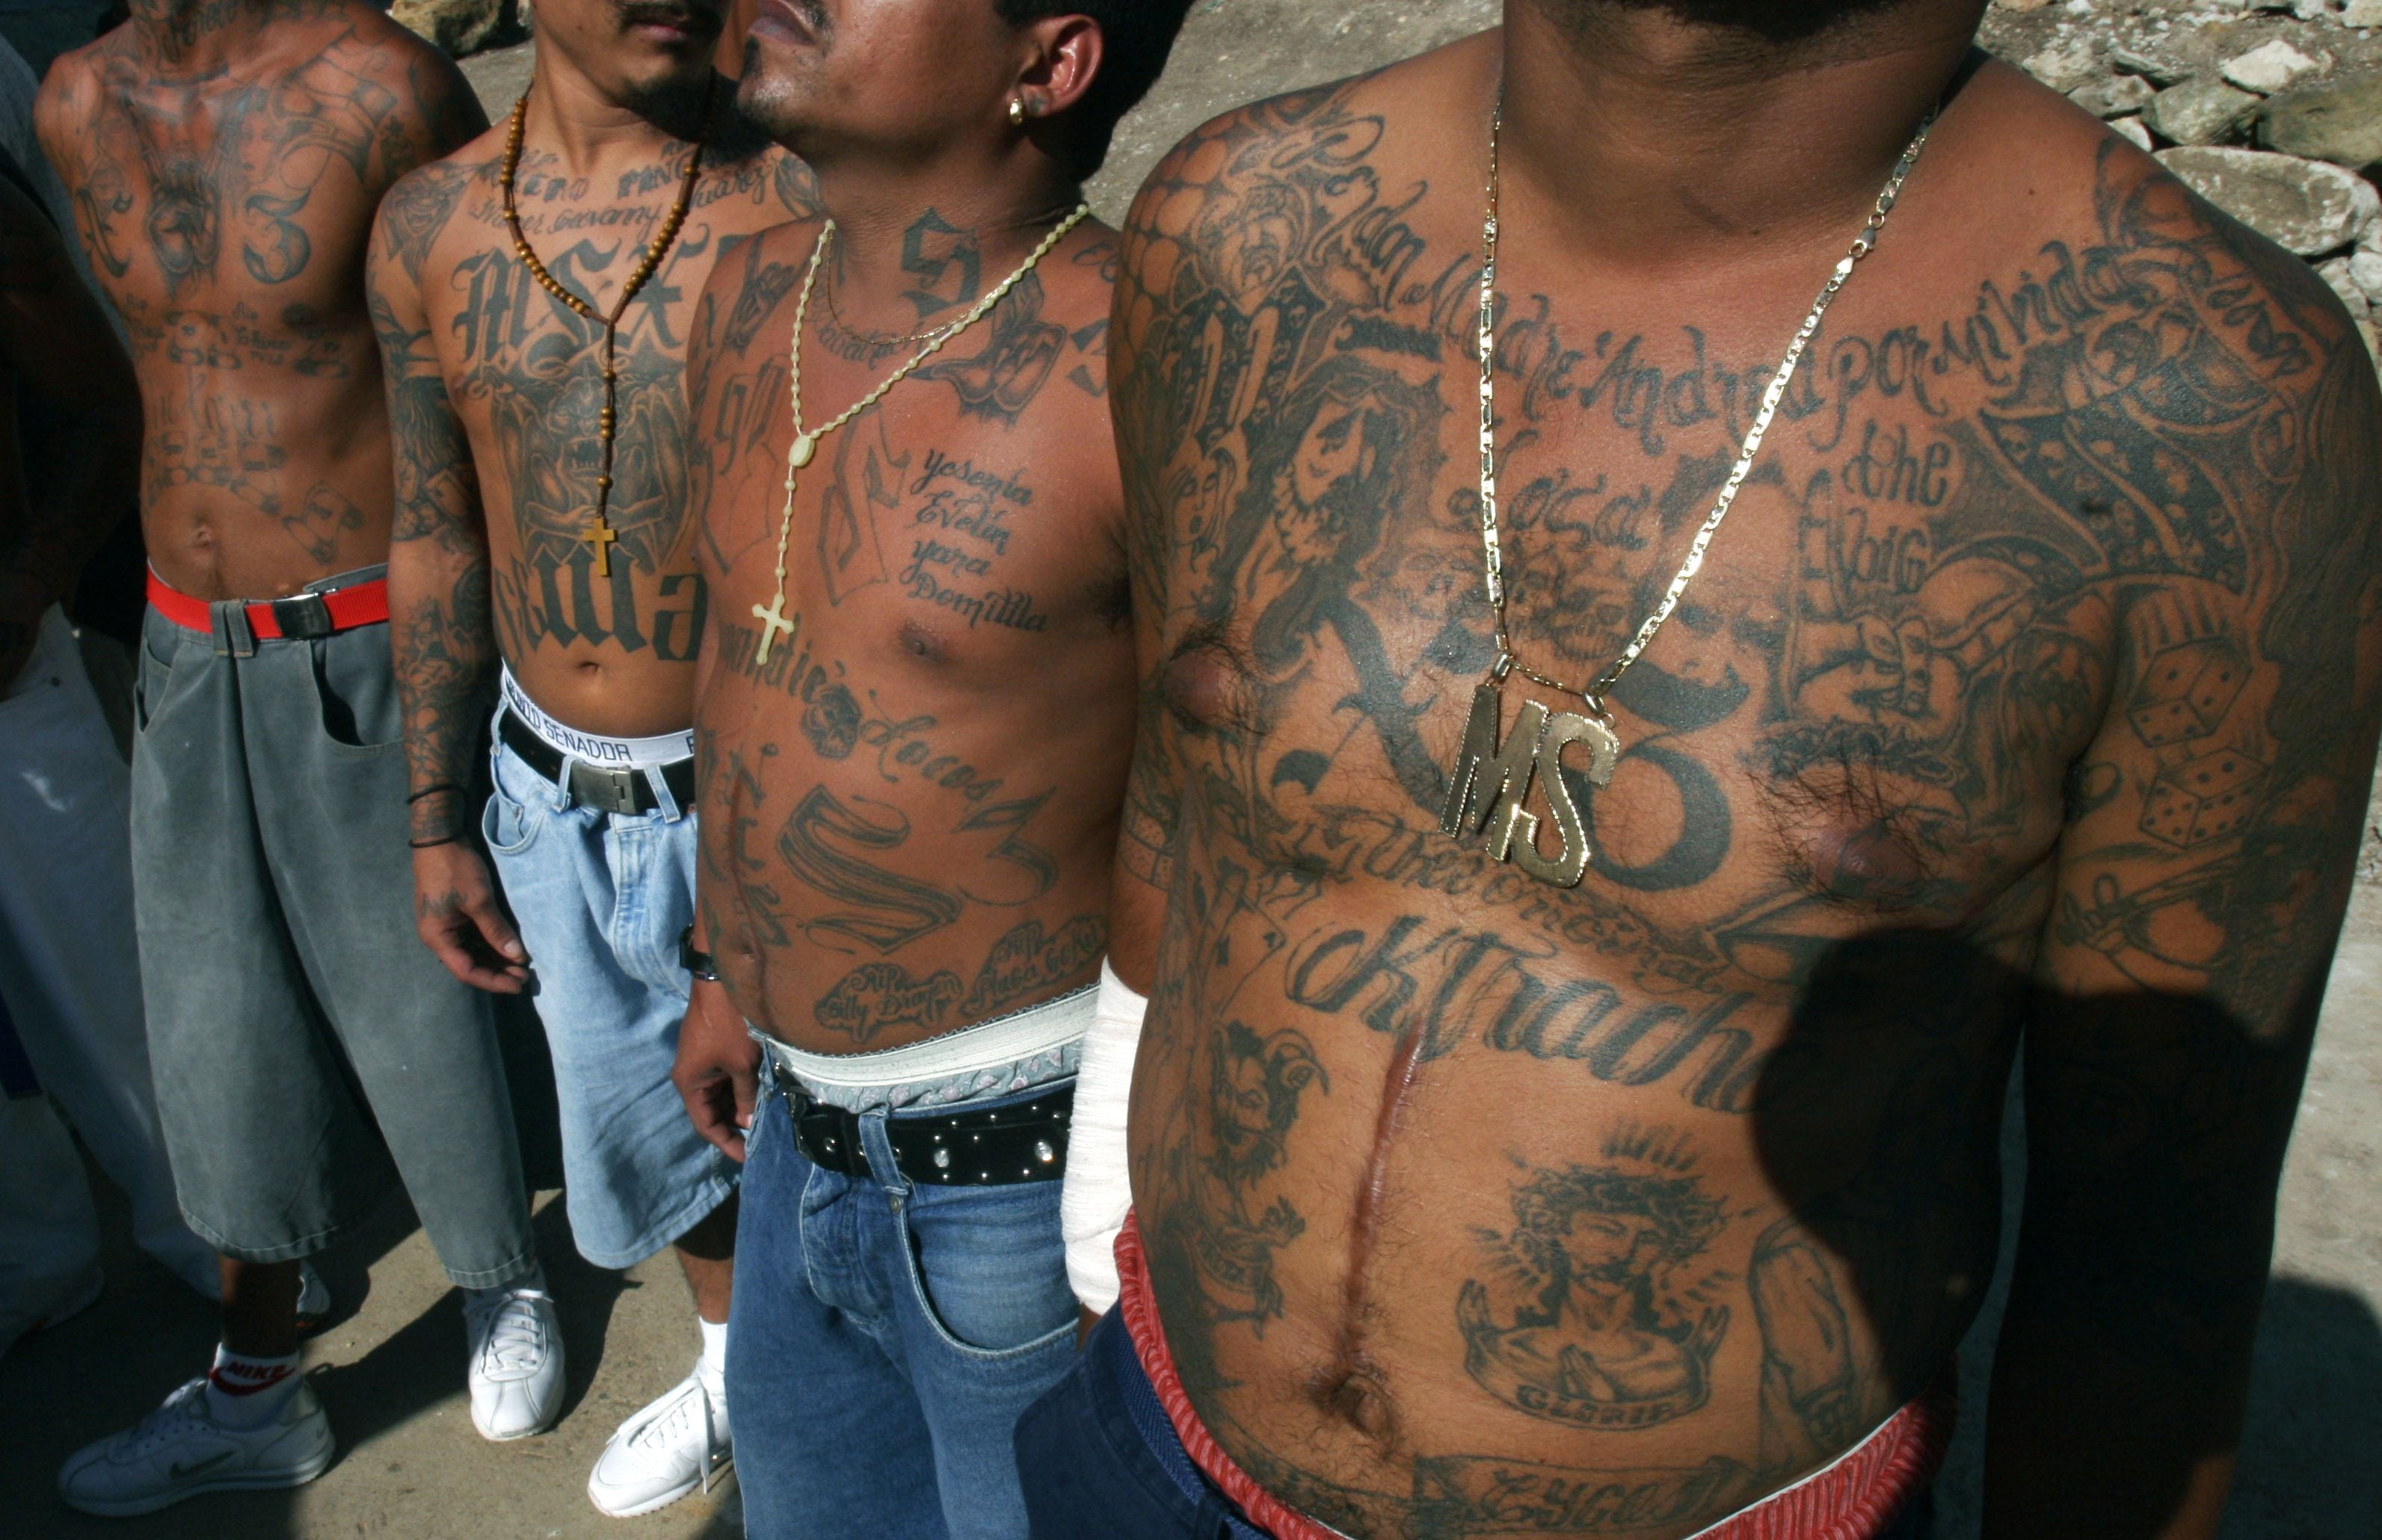 FILE - In this Nov.24, 2005 file photo shows unidentified members of the gang Mara Salvatrucha who are incarcerated in the National Penitentiary of Tamara, in Tegucigalpa, Honduras. The deadliest prison blaze in a century has drawn attention to an unfortunate U.S. export to Central America, street gangs. Prisons in Honduras and elsewhere in Central America are teeming with inmates who belong to gangs that have their roots in Southern California. Refugees of the regions civil wars sowed a new breed of violence on the streets of Los Angeles in the 1980s. (AP Photo/Esteban Felix,File)